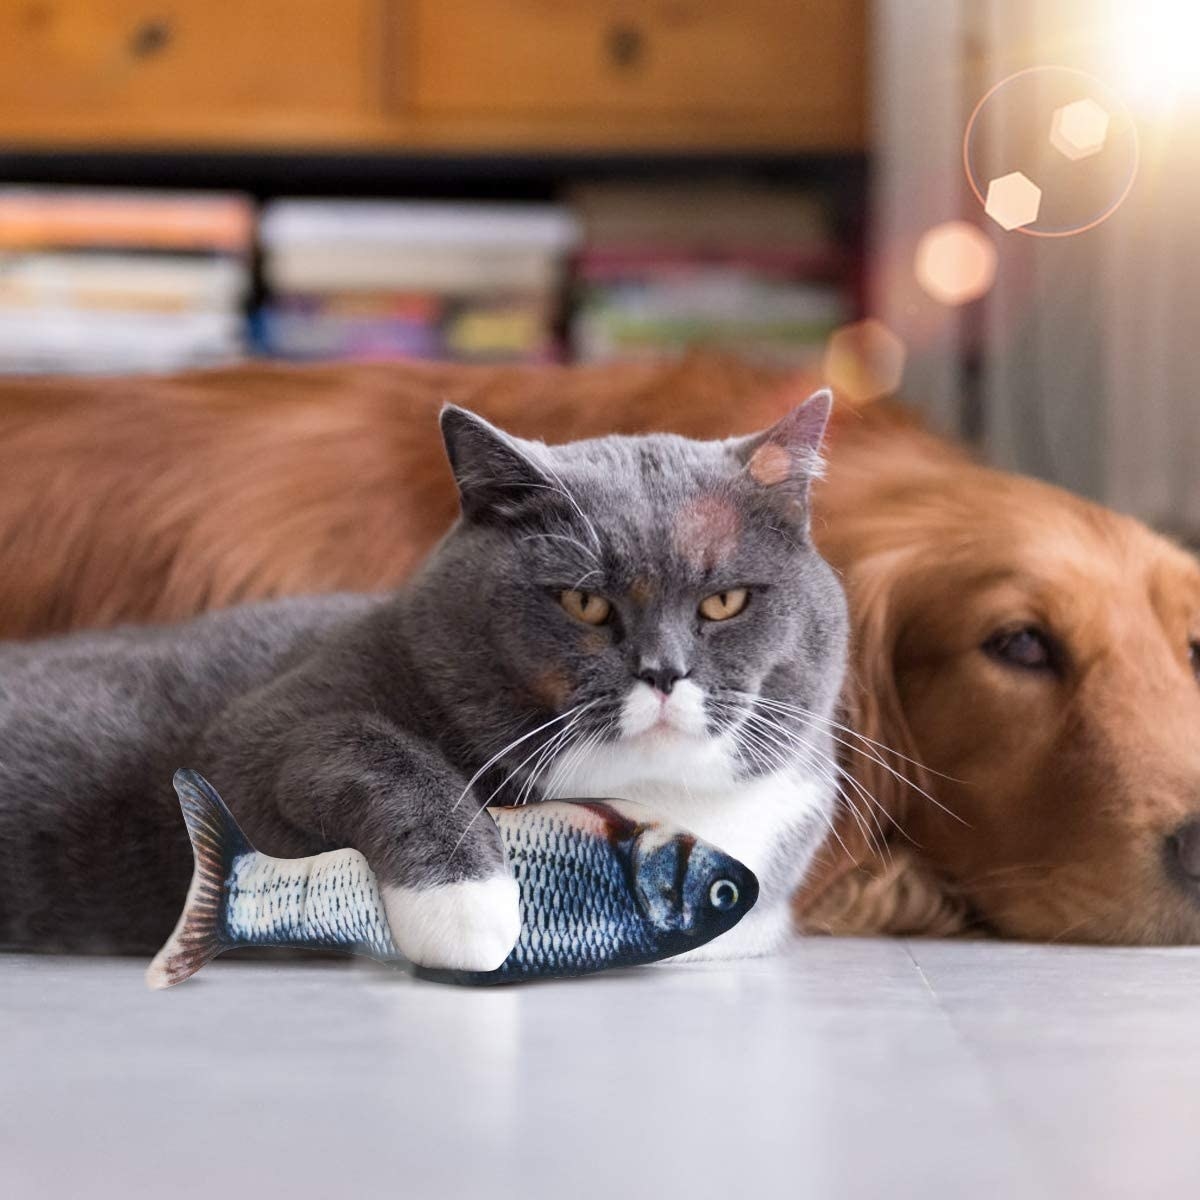 A cat holding the flopping fish while lying next to a dog